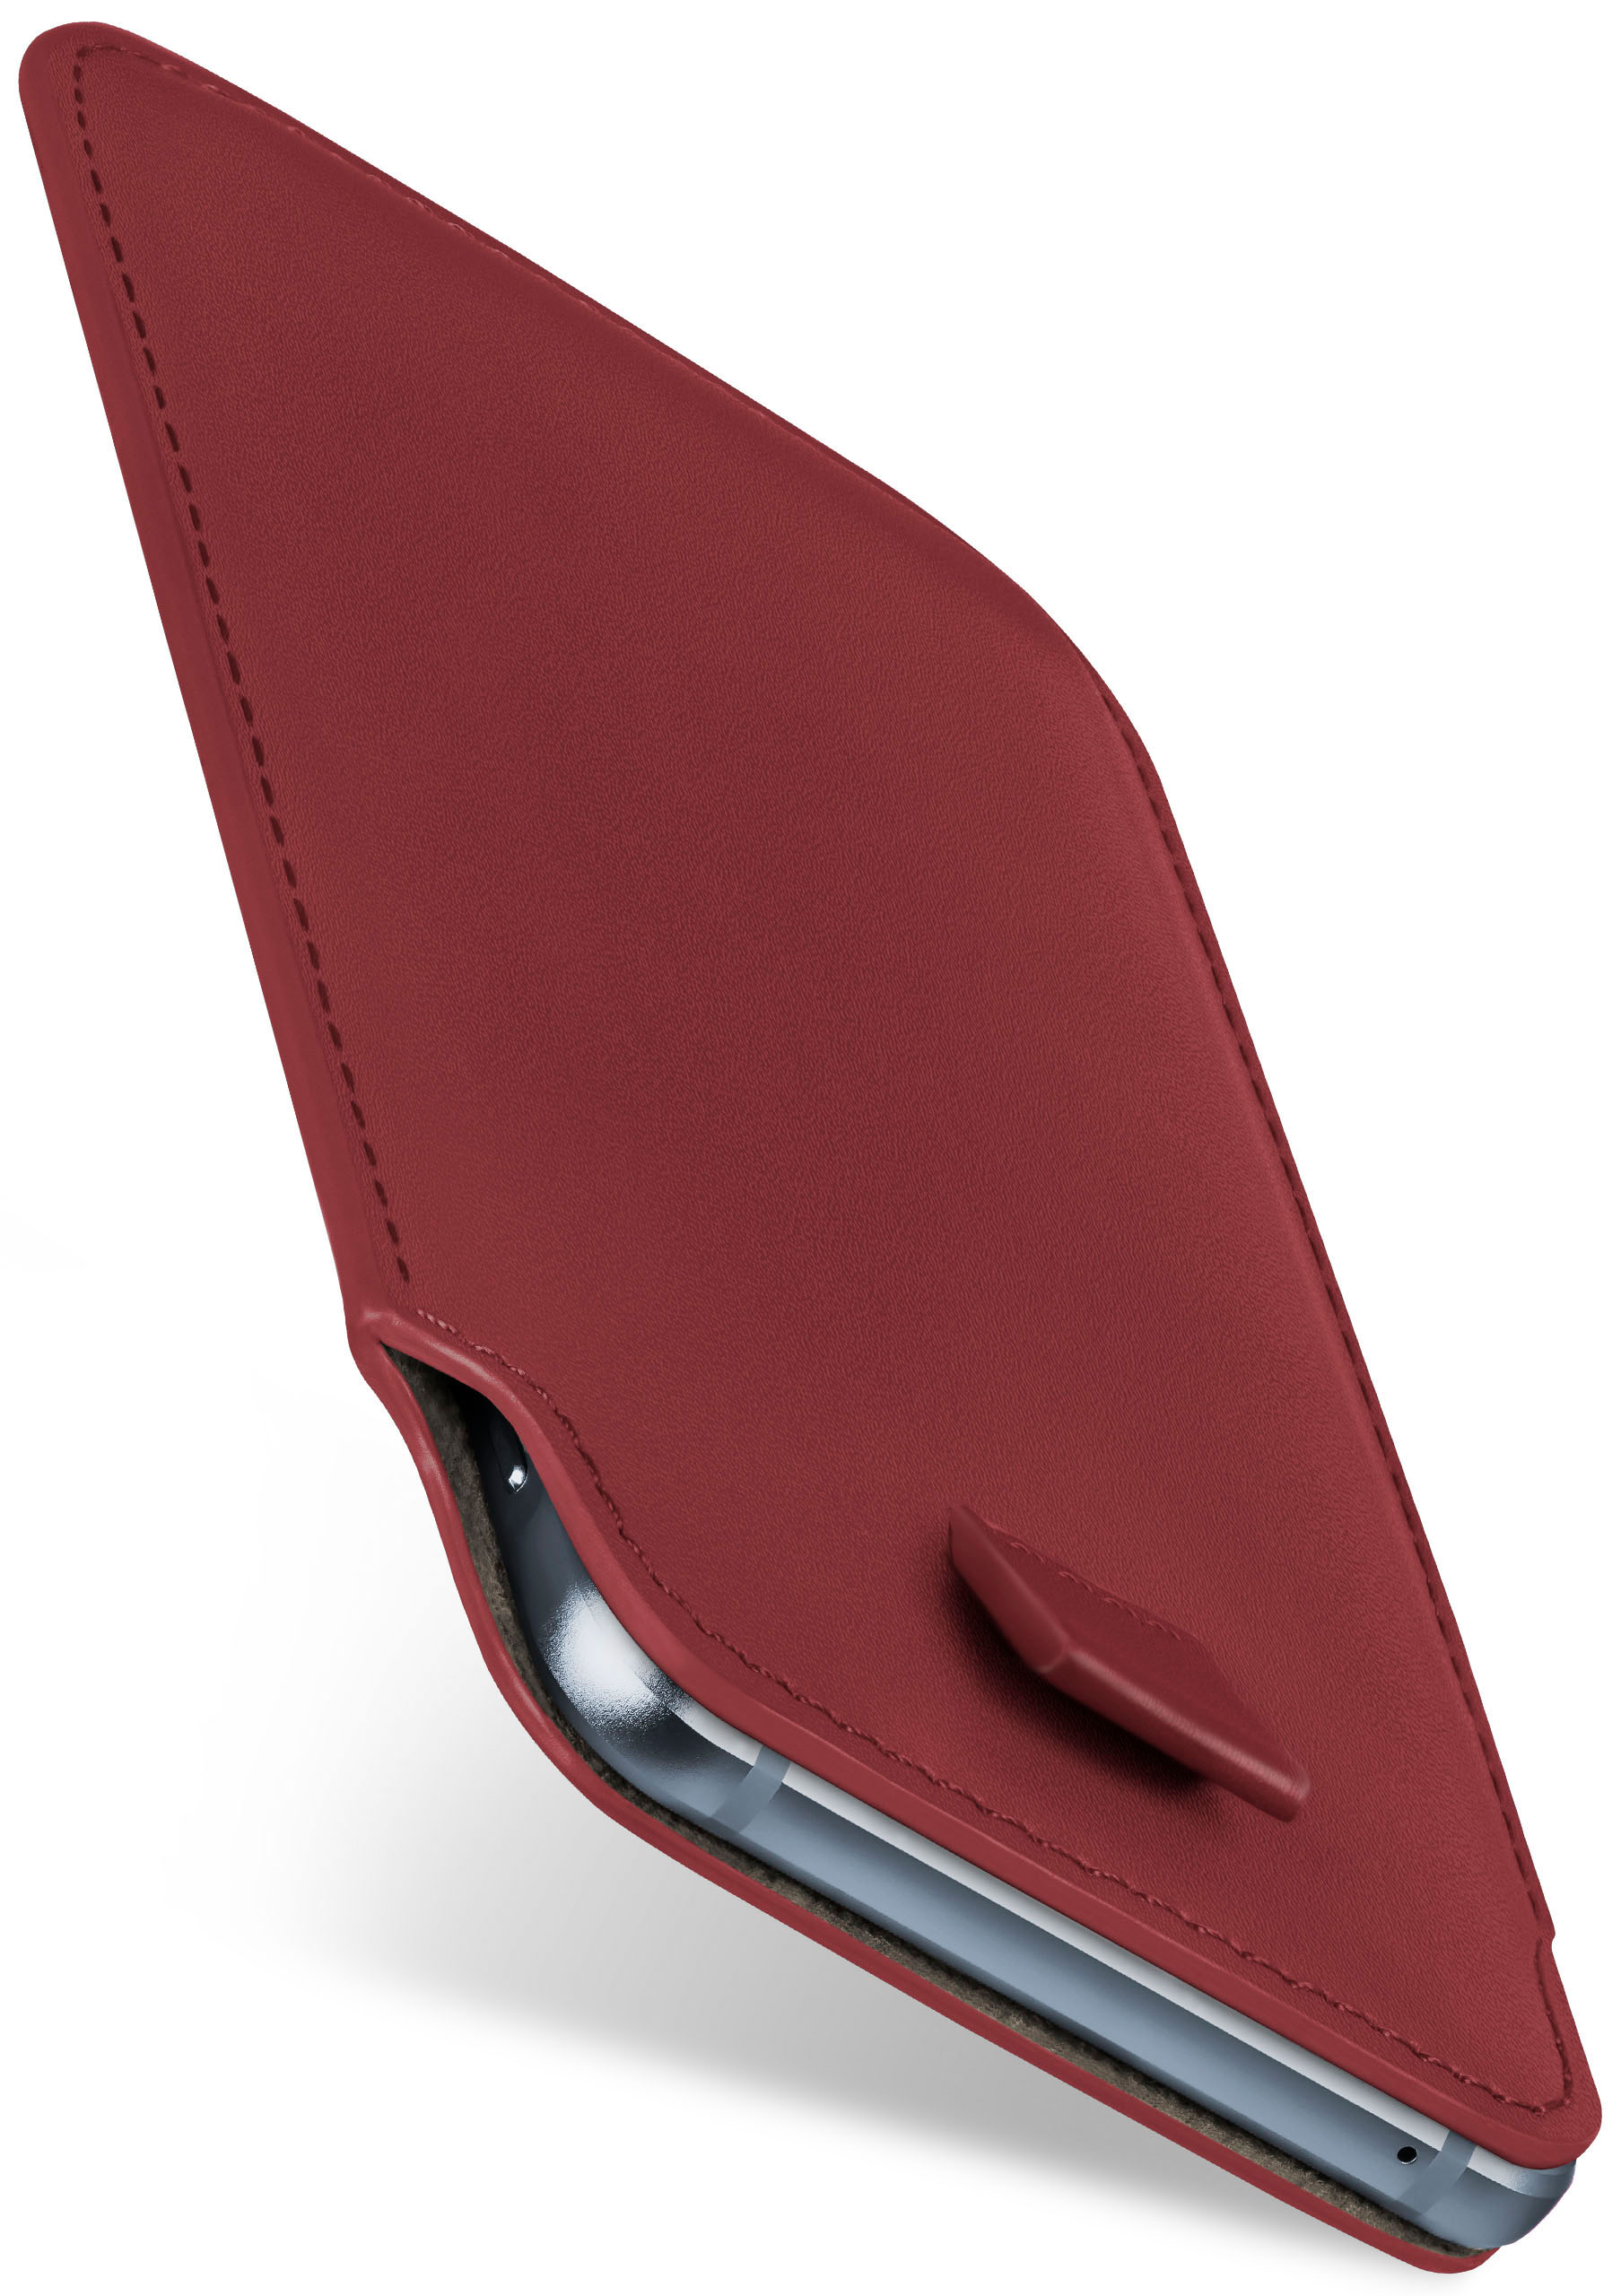 MOEX Slide Case, Full Cover, Maroon-Red / (2016), / Apple, iPhone SE 5 5s